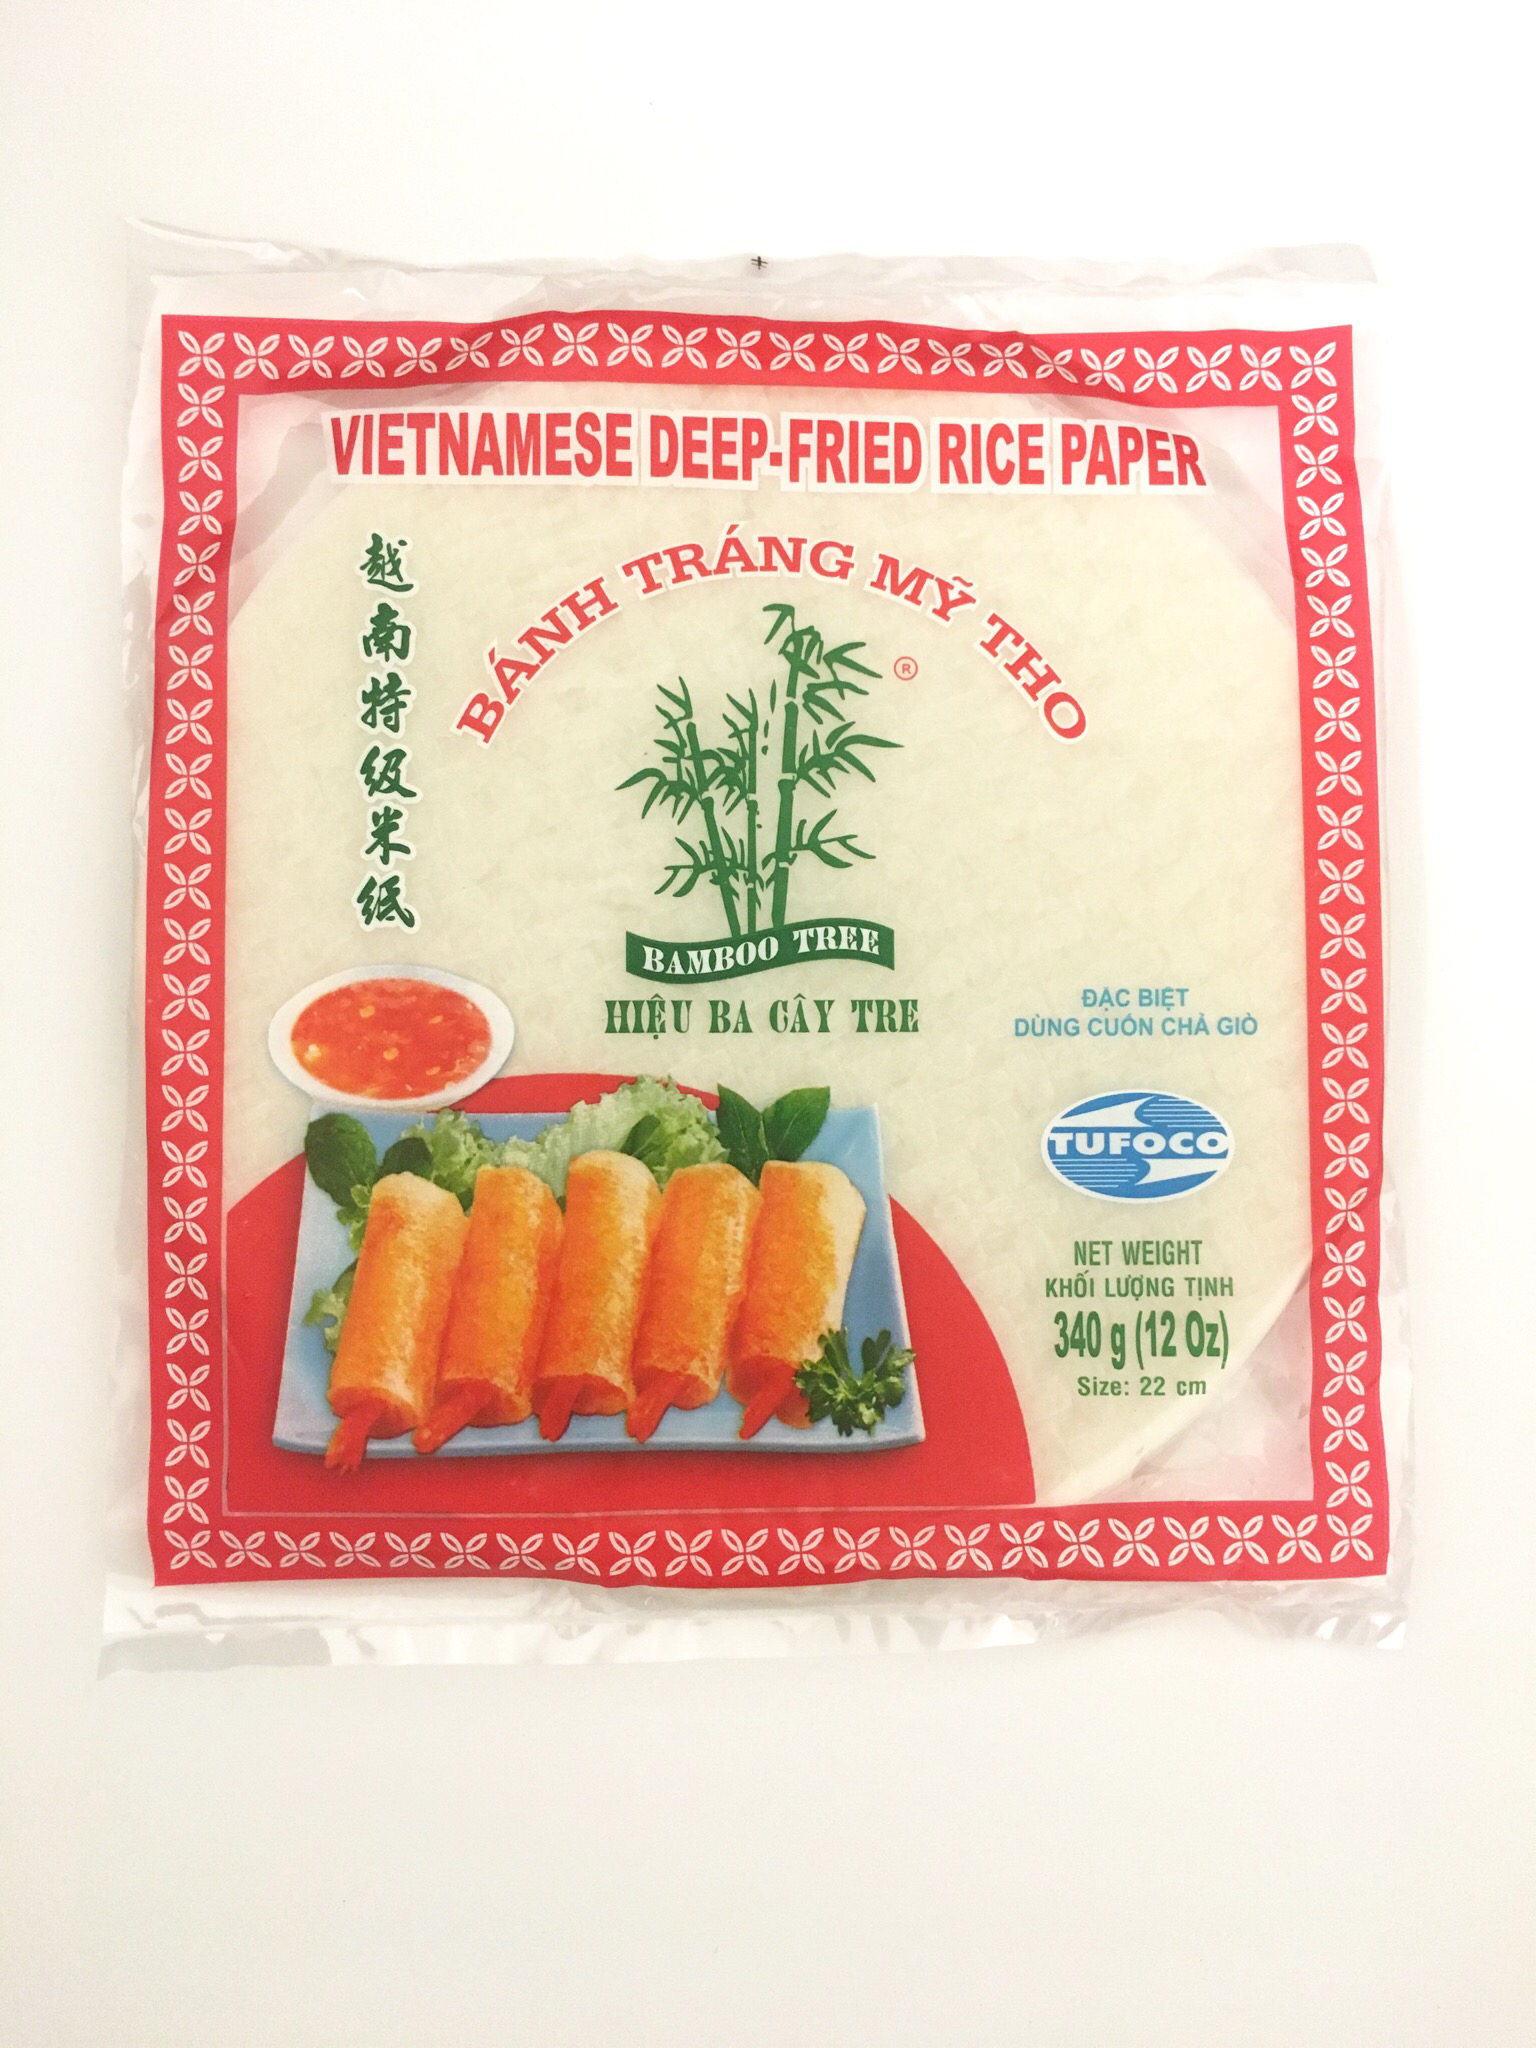 Spring Roll Round Rice Paper Wrappers - Bamboo Tree (25cm, 12 oz.)